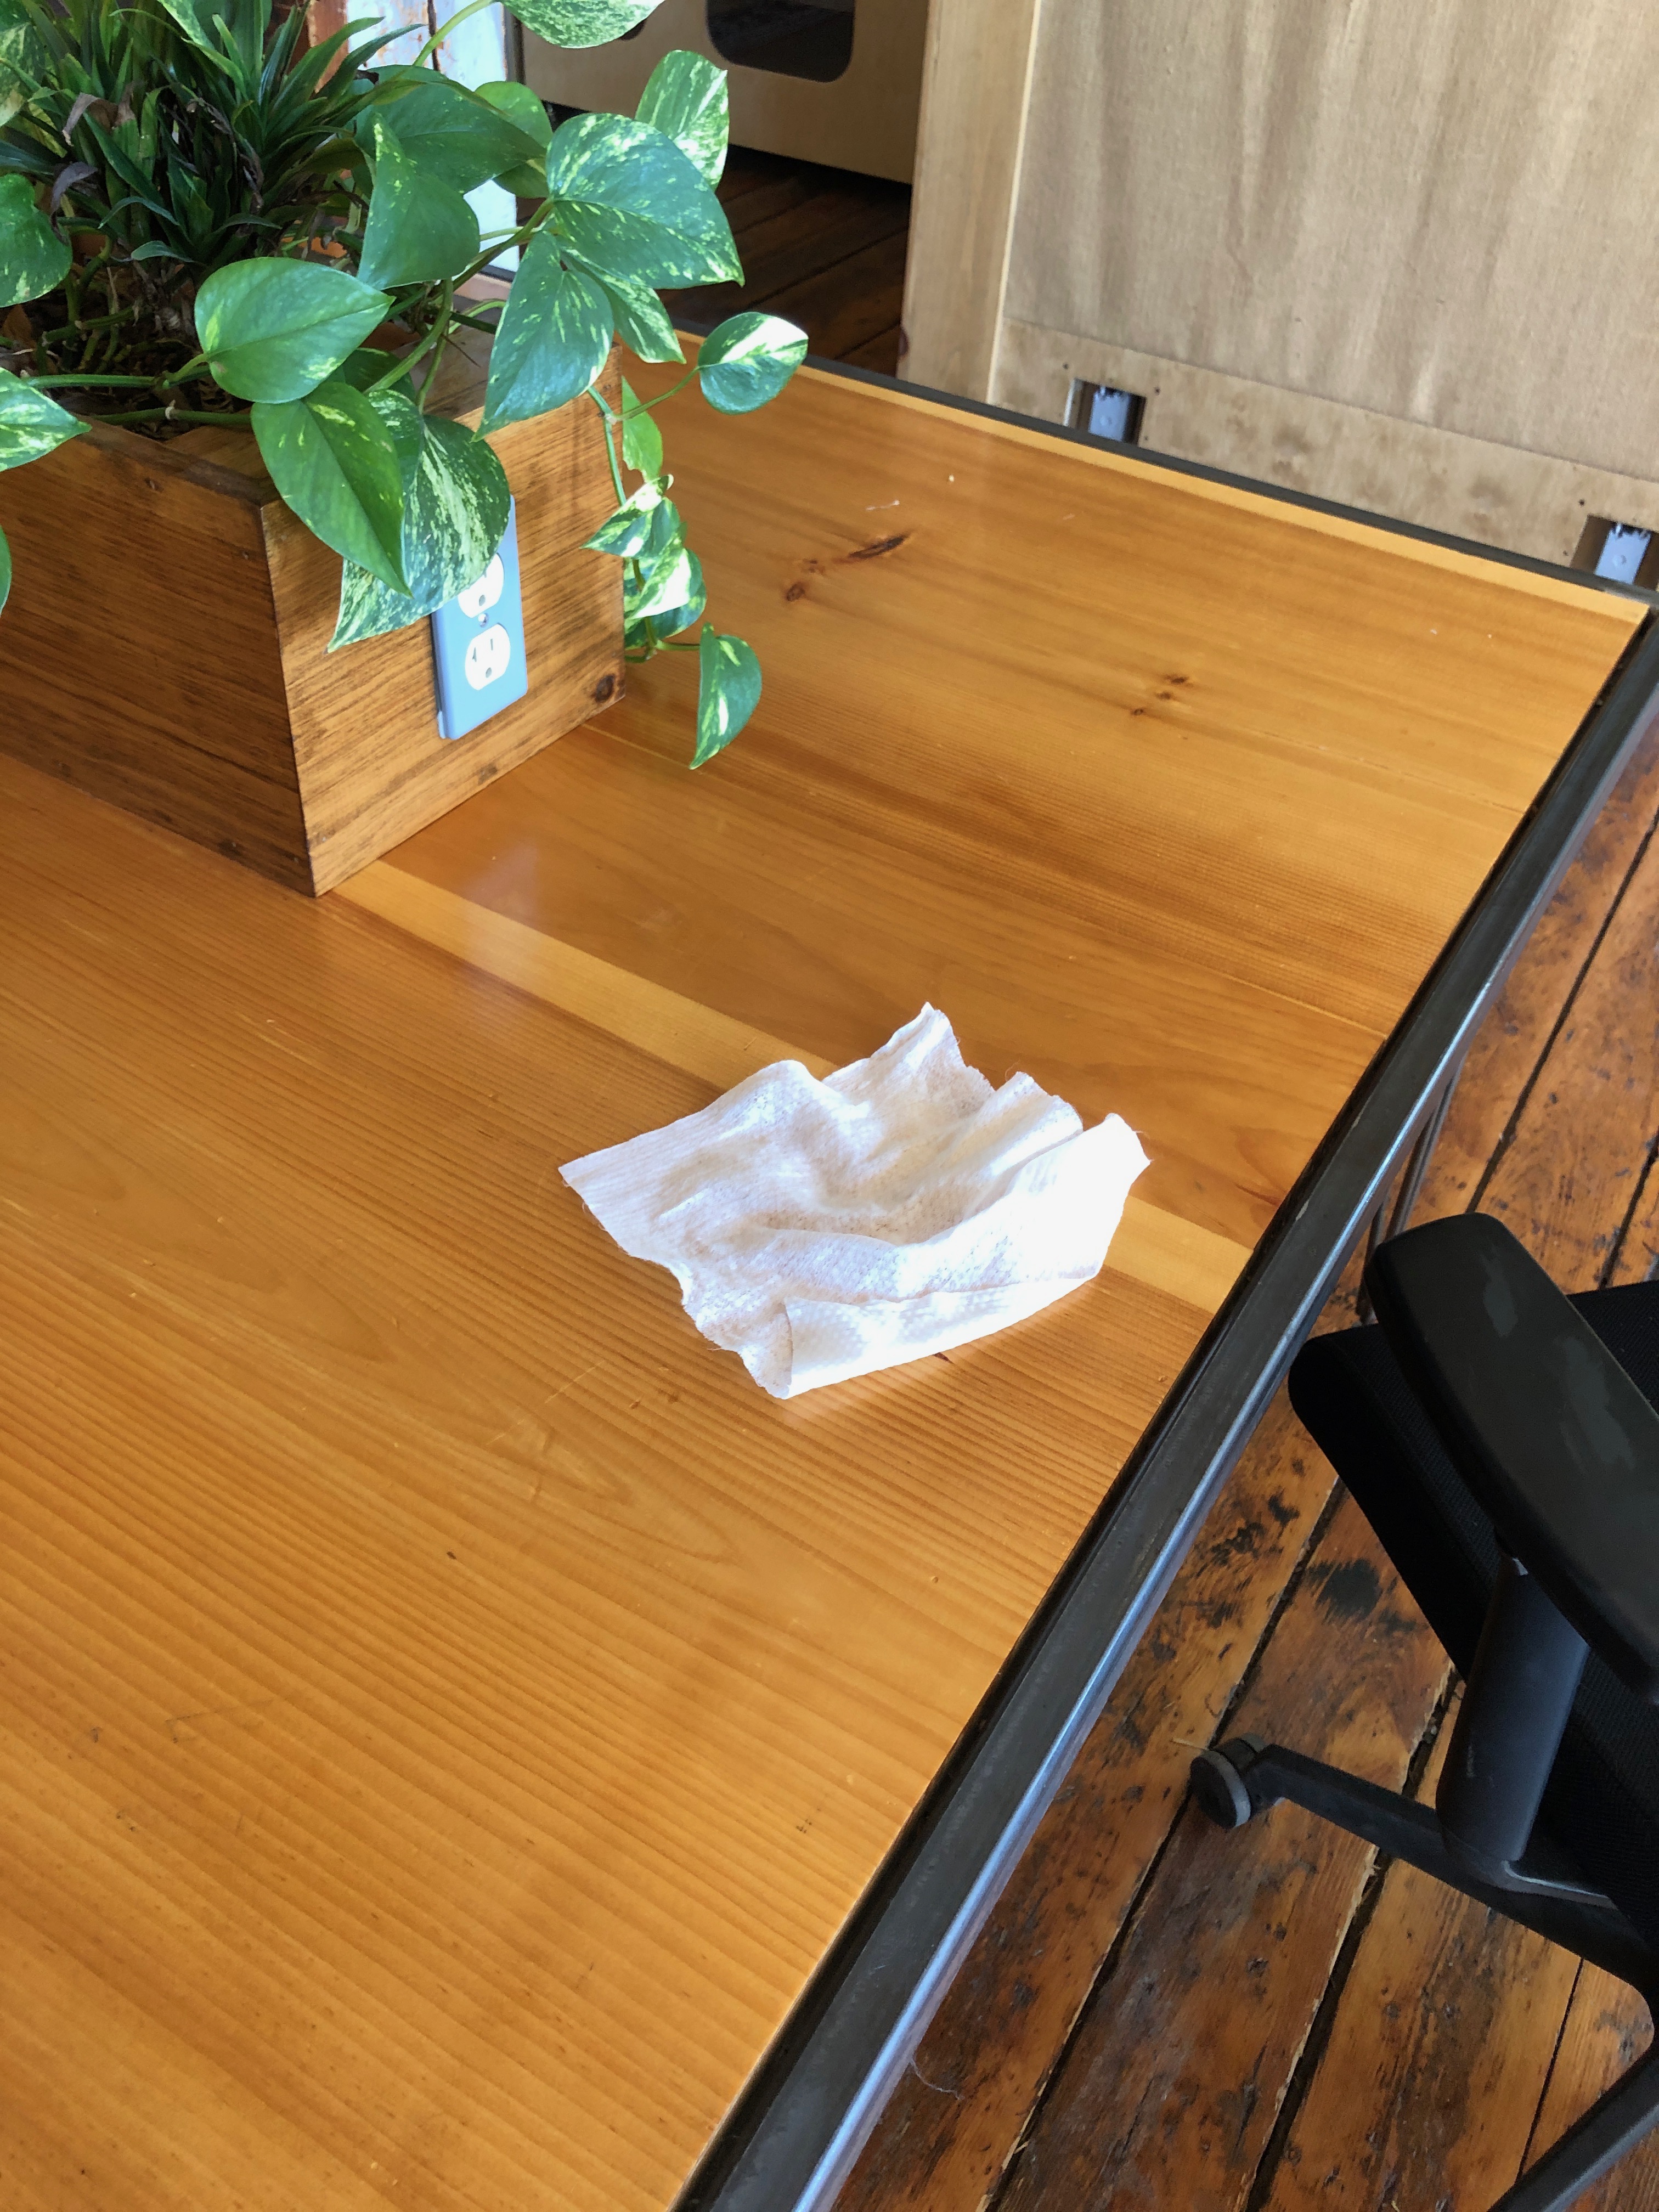 I was admonished by Mary about wiping down my counter at my co-working space. Being able to work here and not at home has made me feel much more normal these days. April 18, 2020